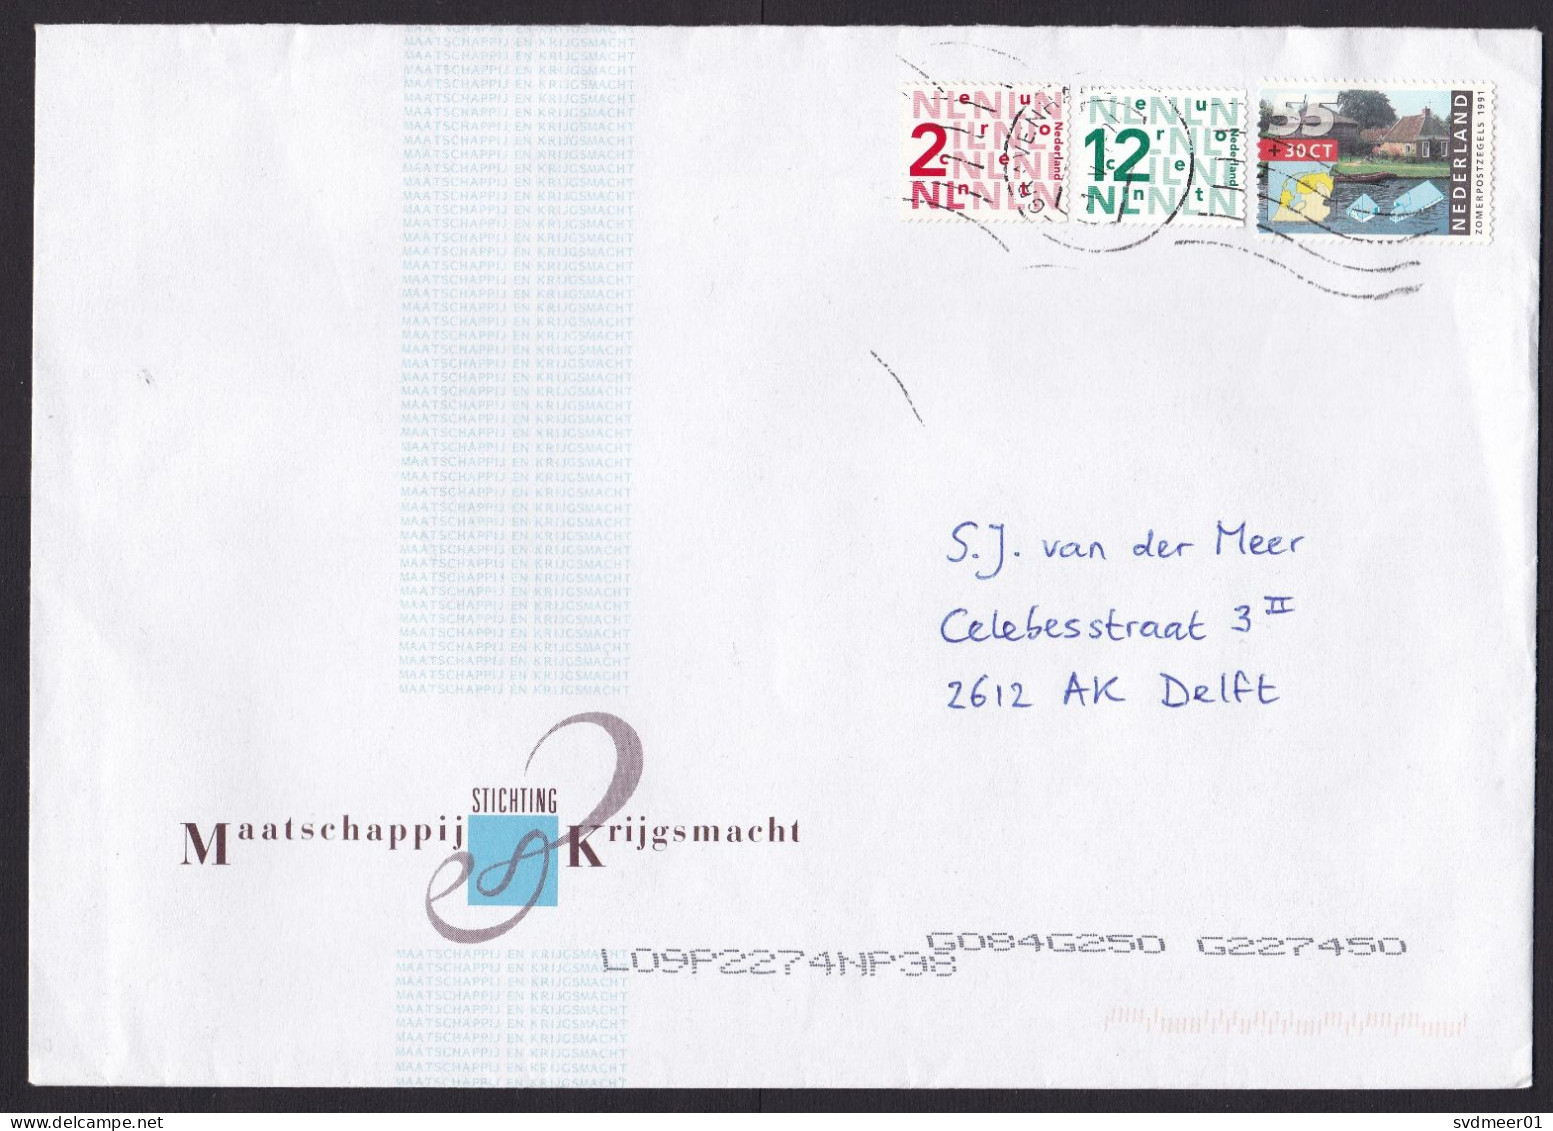 Netherlands: Cover, 3 Stamps, Traditional Farm House Architecture, Map, Dual Currency Guilder-Euro (minor Crease) - Covers & Documents